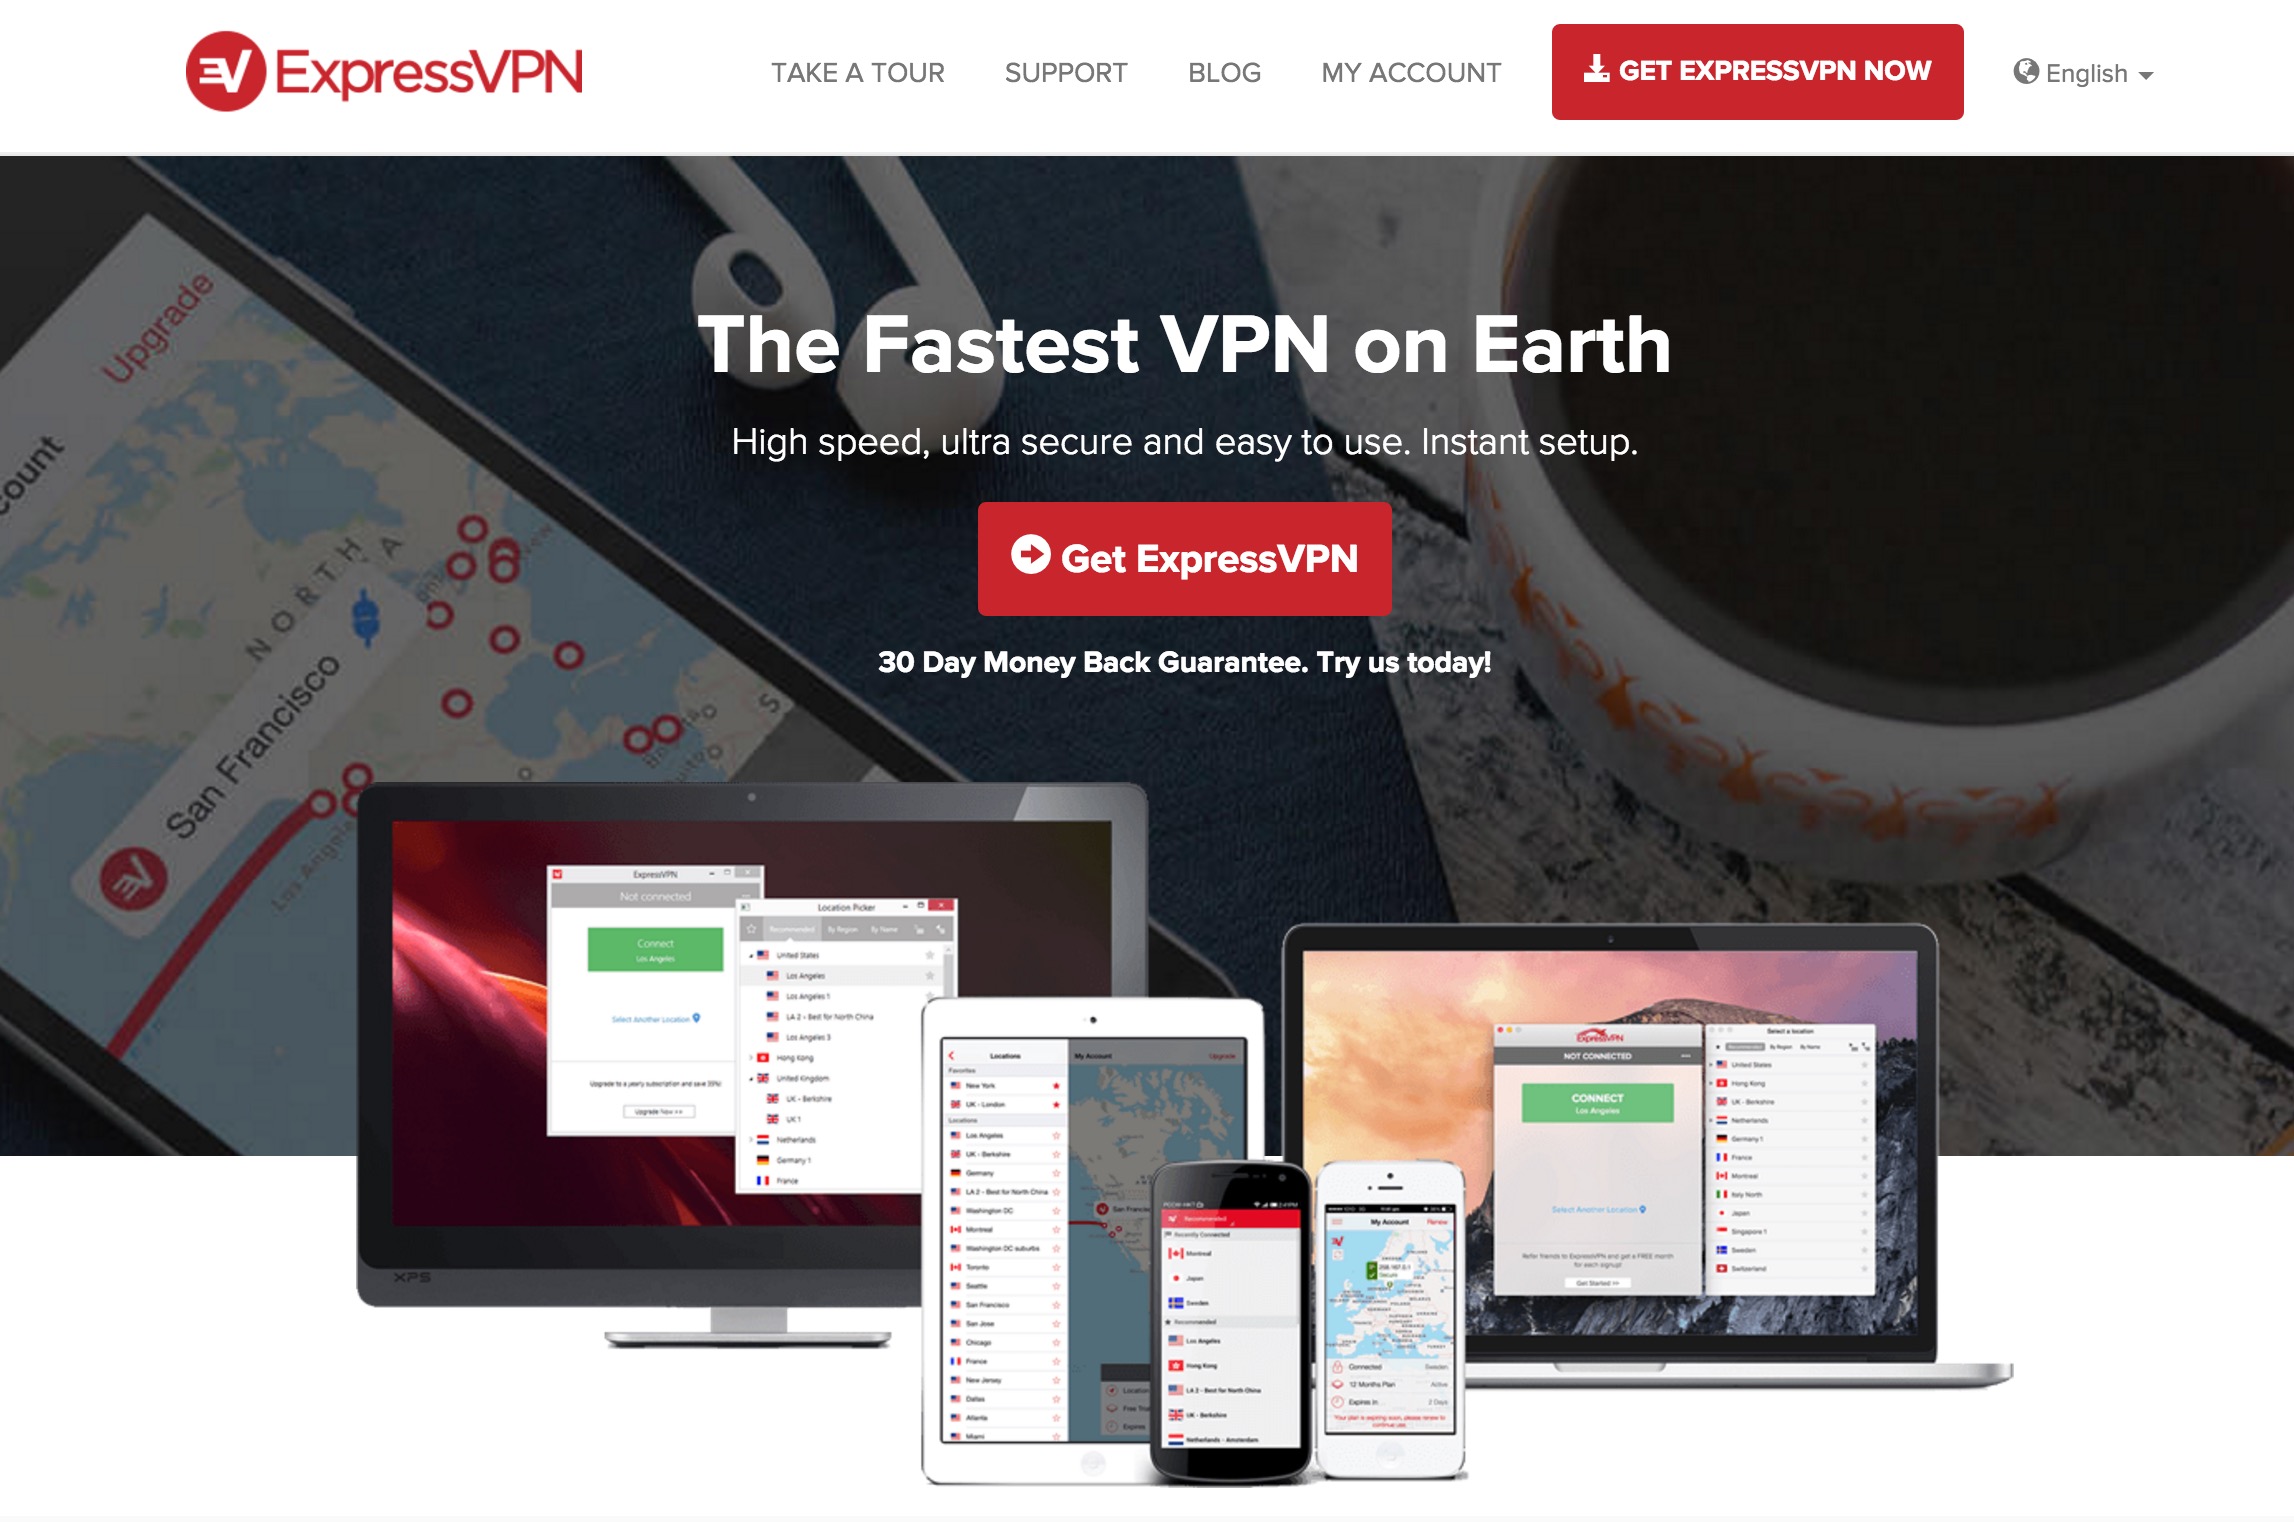  ExpressVPN Review - The Pros and Cons